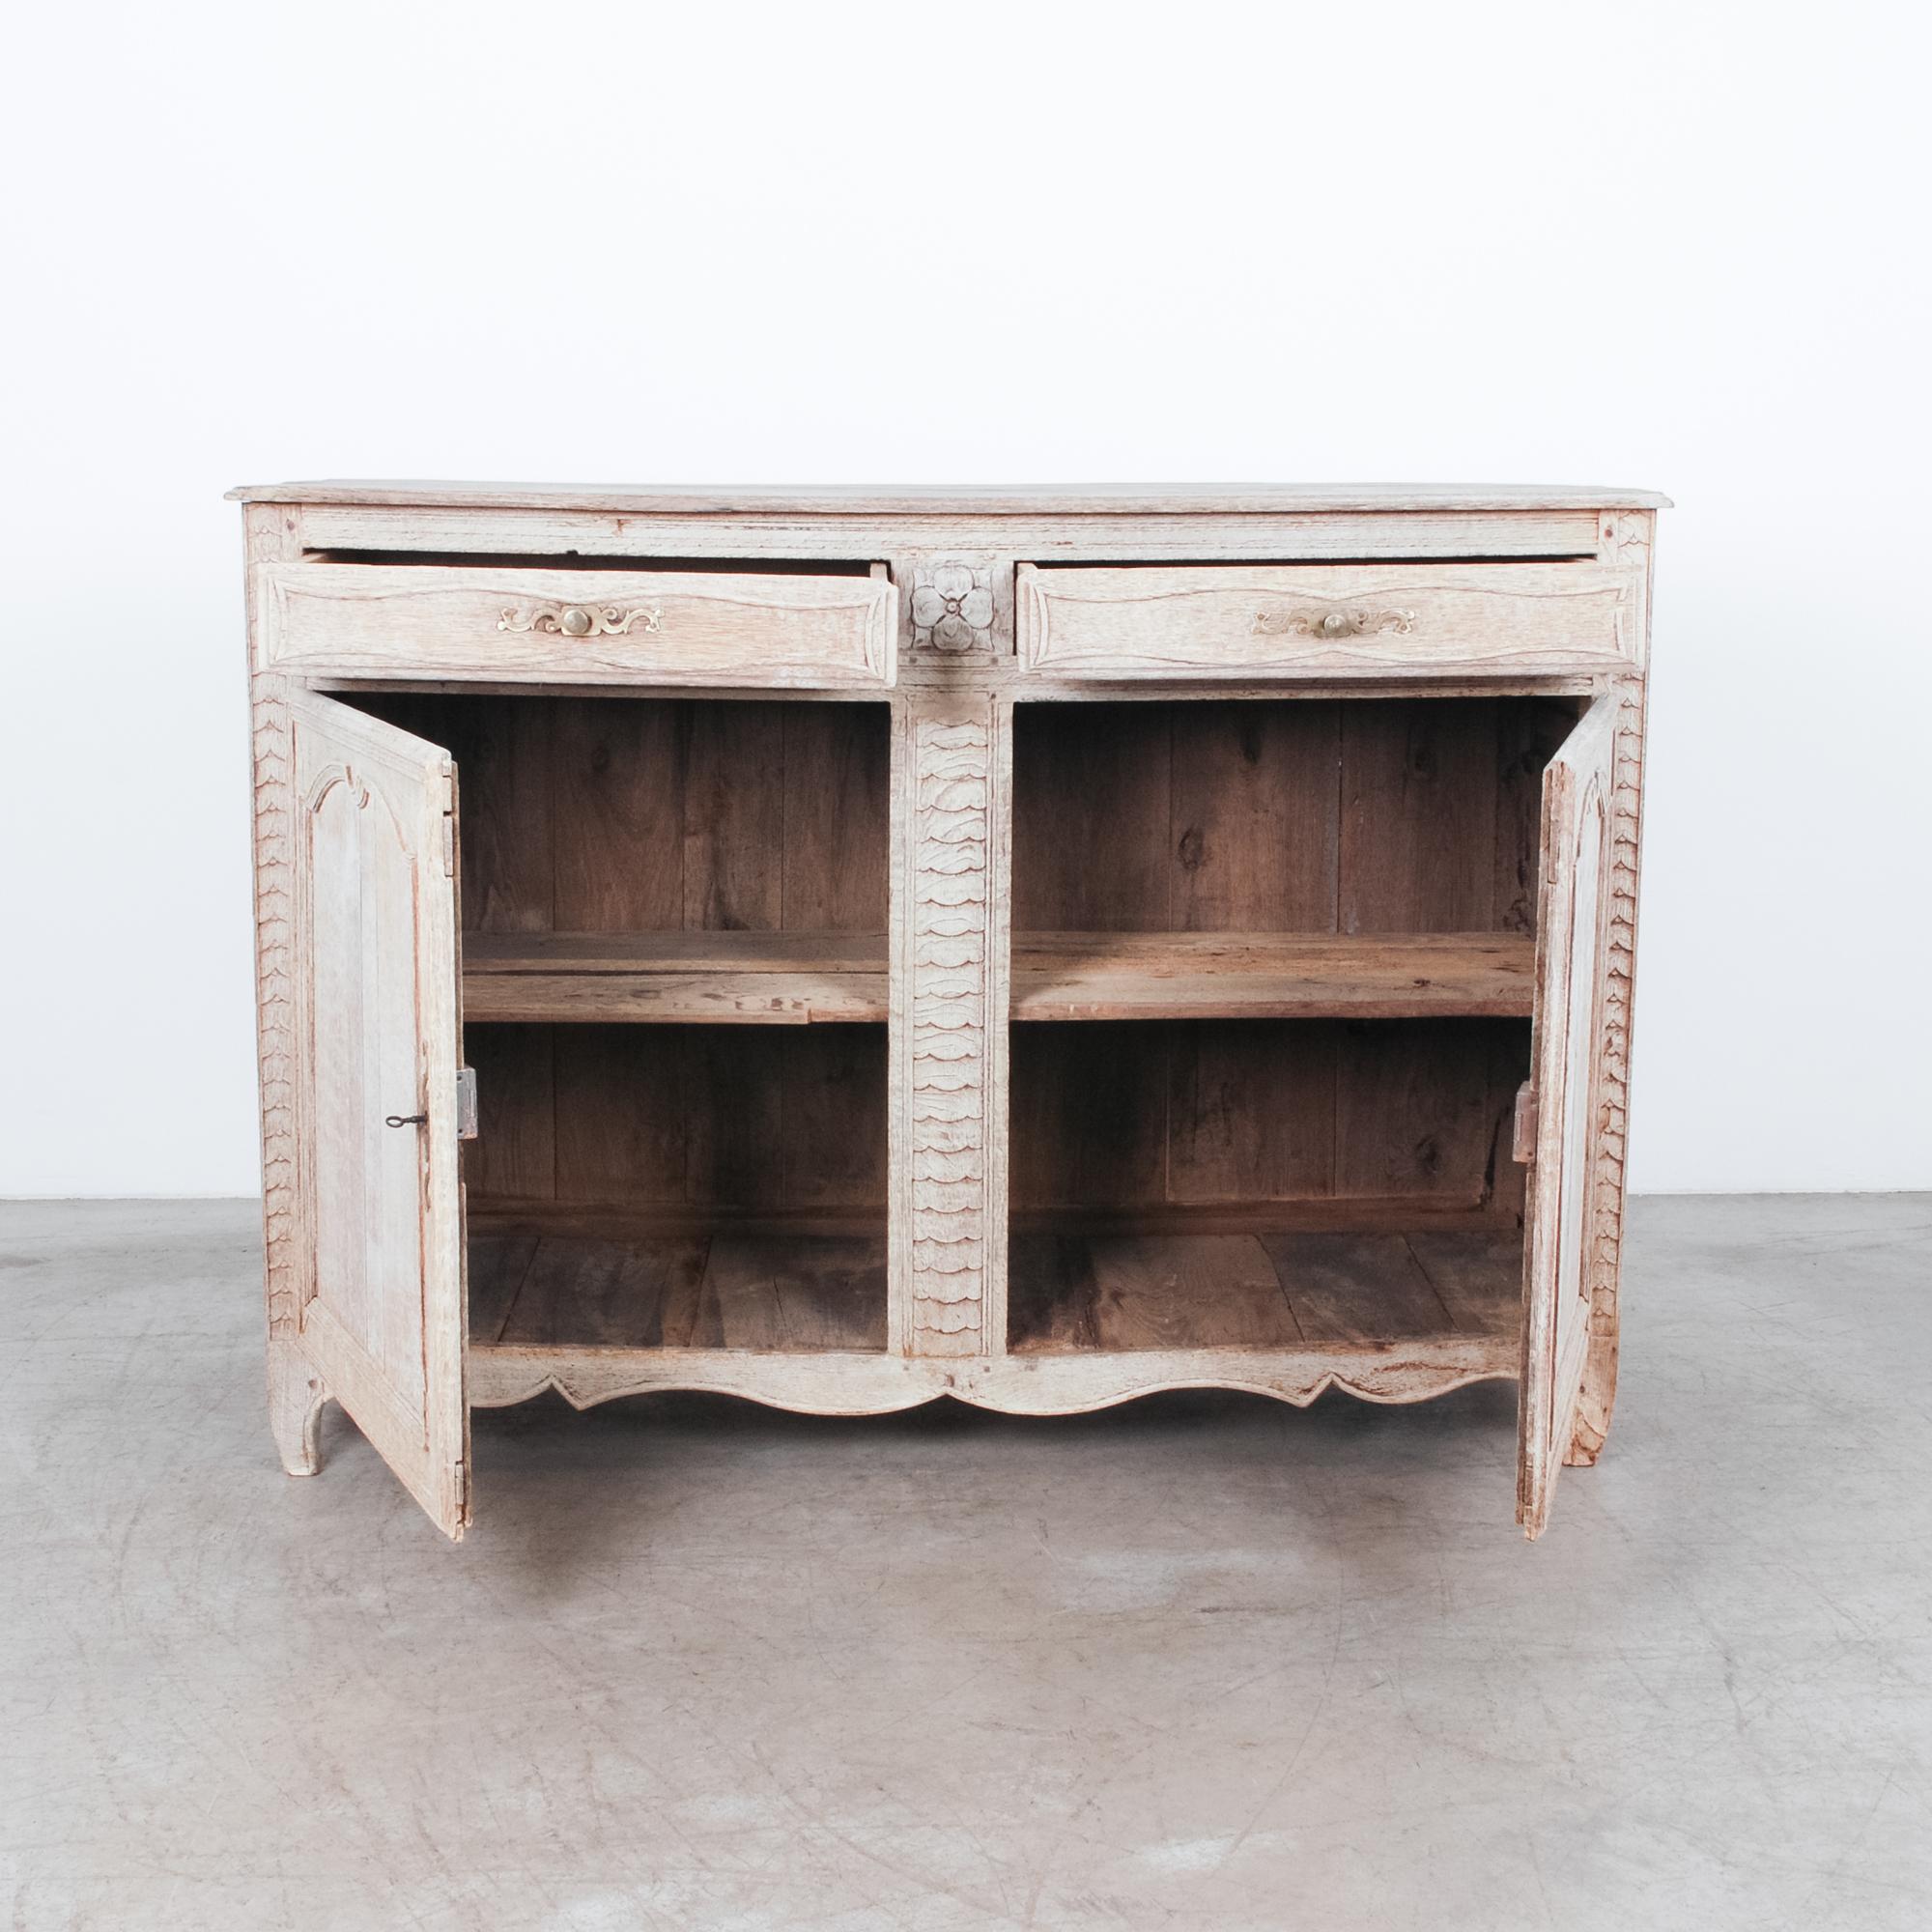 Beautiful functional buffet with floral details. Natural bleached oak finish, constructed to last with old-world expertise, original brass hardware, interior shelf and oak pins. Attractive wooden joinery looks great from every angle.